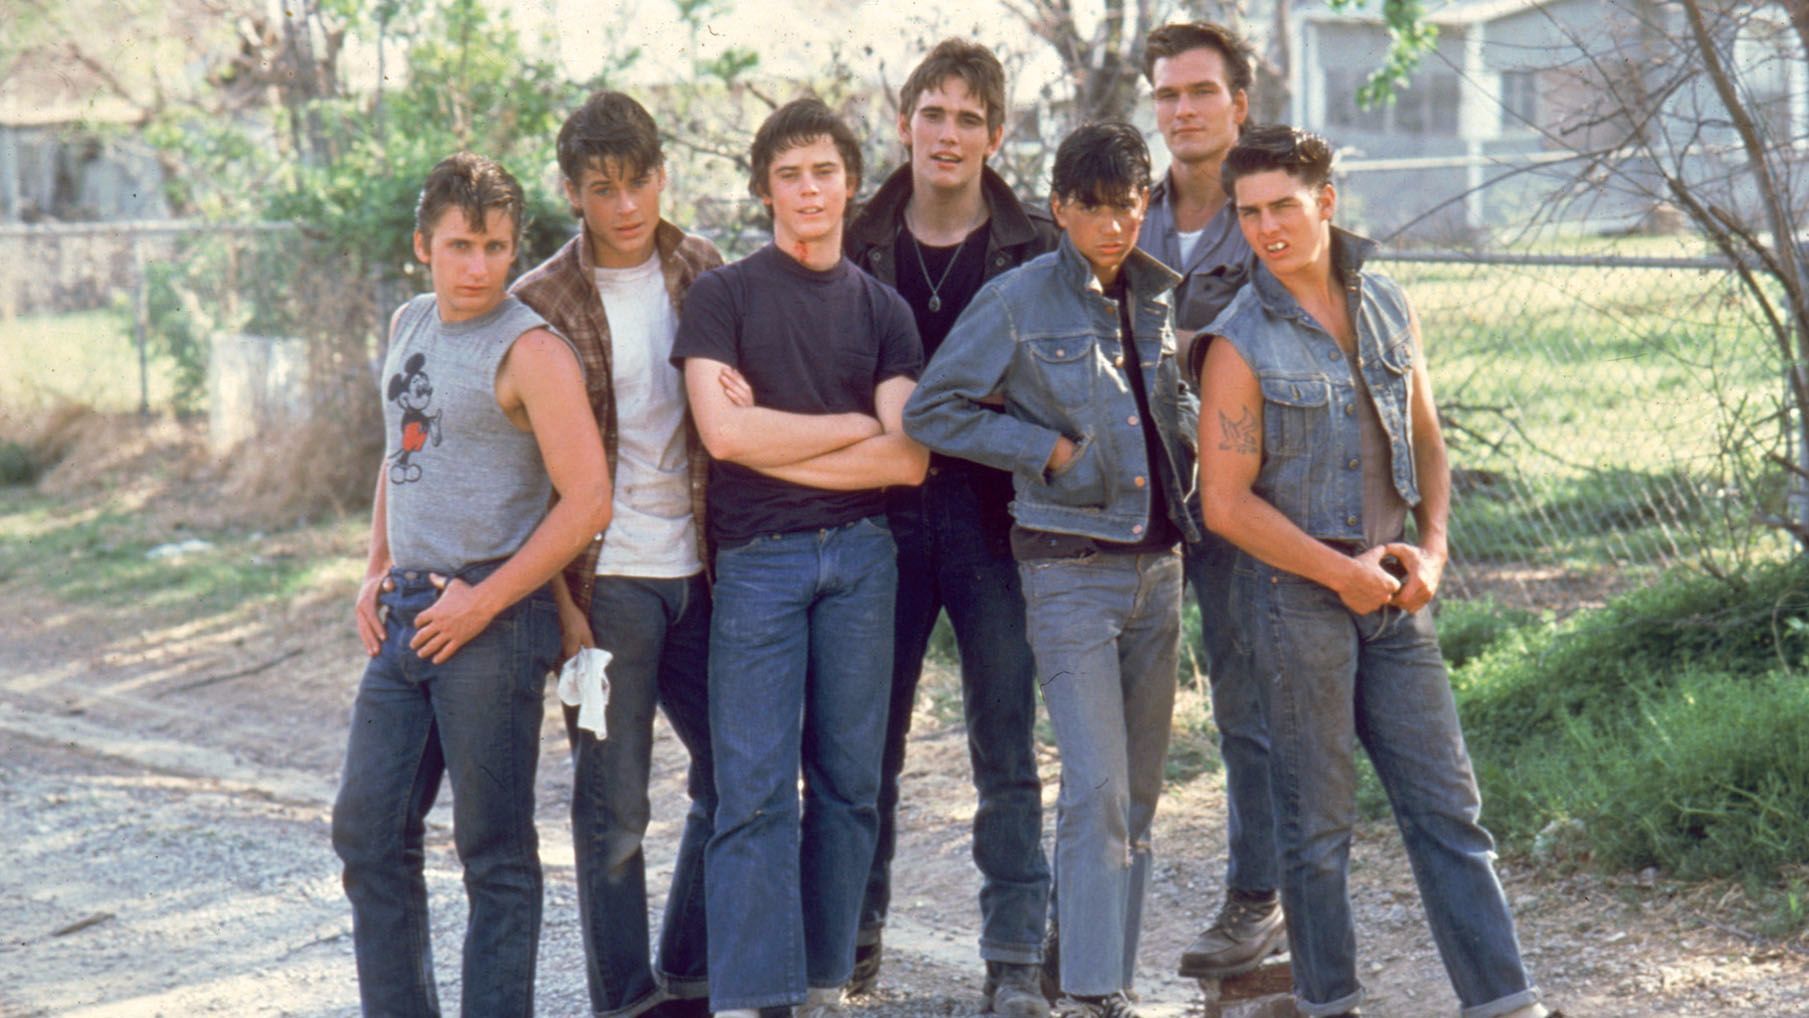 From the 1983 film adaptation of "The Outsiders."